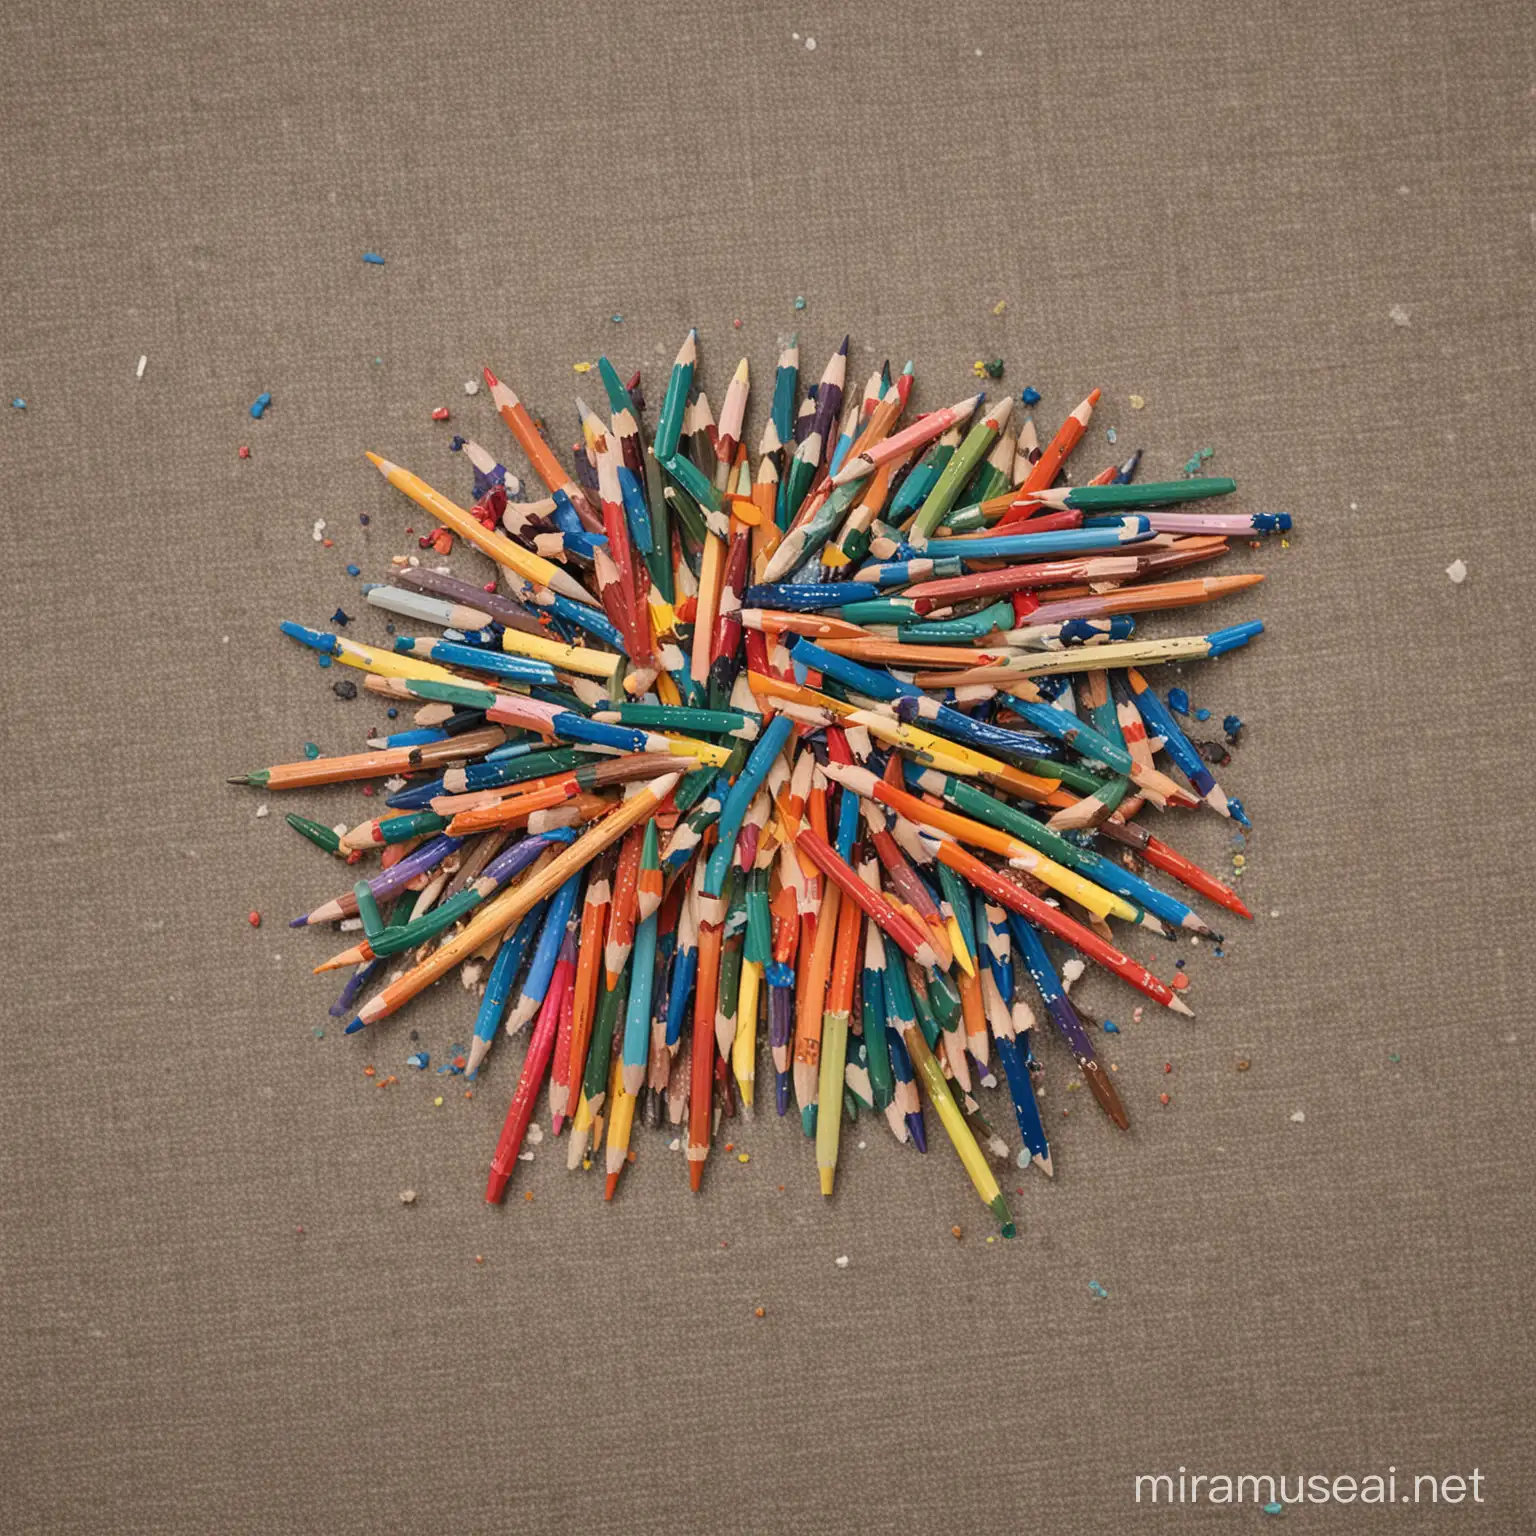 Vibrant Colored Pencils Scattered on a Seat